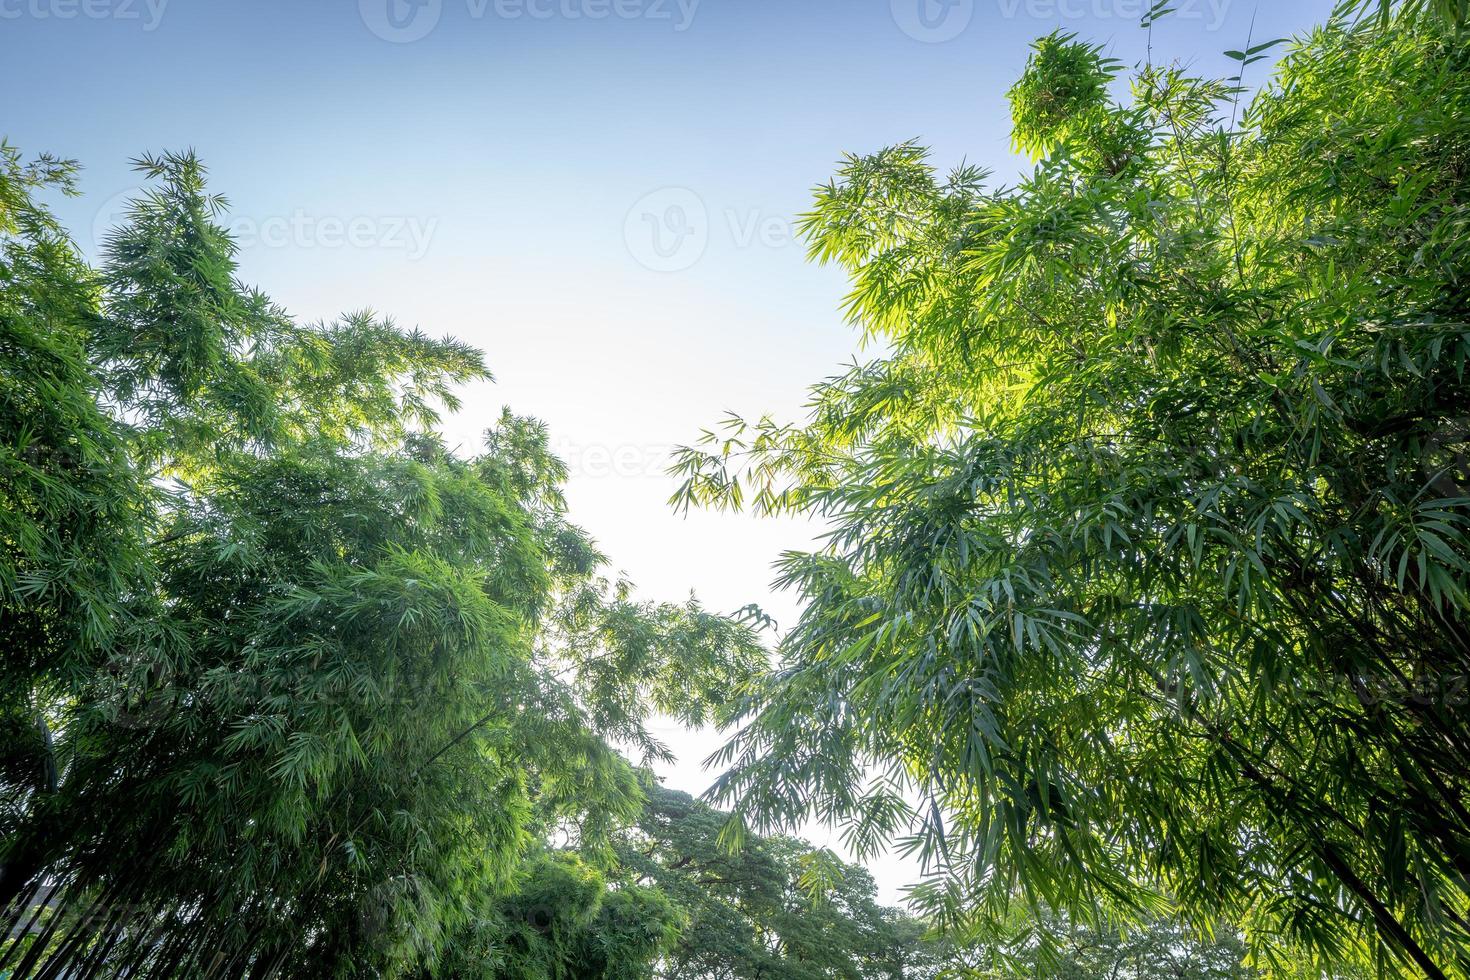 bamboo tree in the forest garden wiht rim light from open sky, represent the fresh and abundant nature in Asia. photo